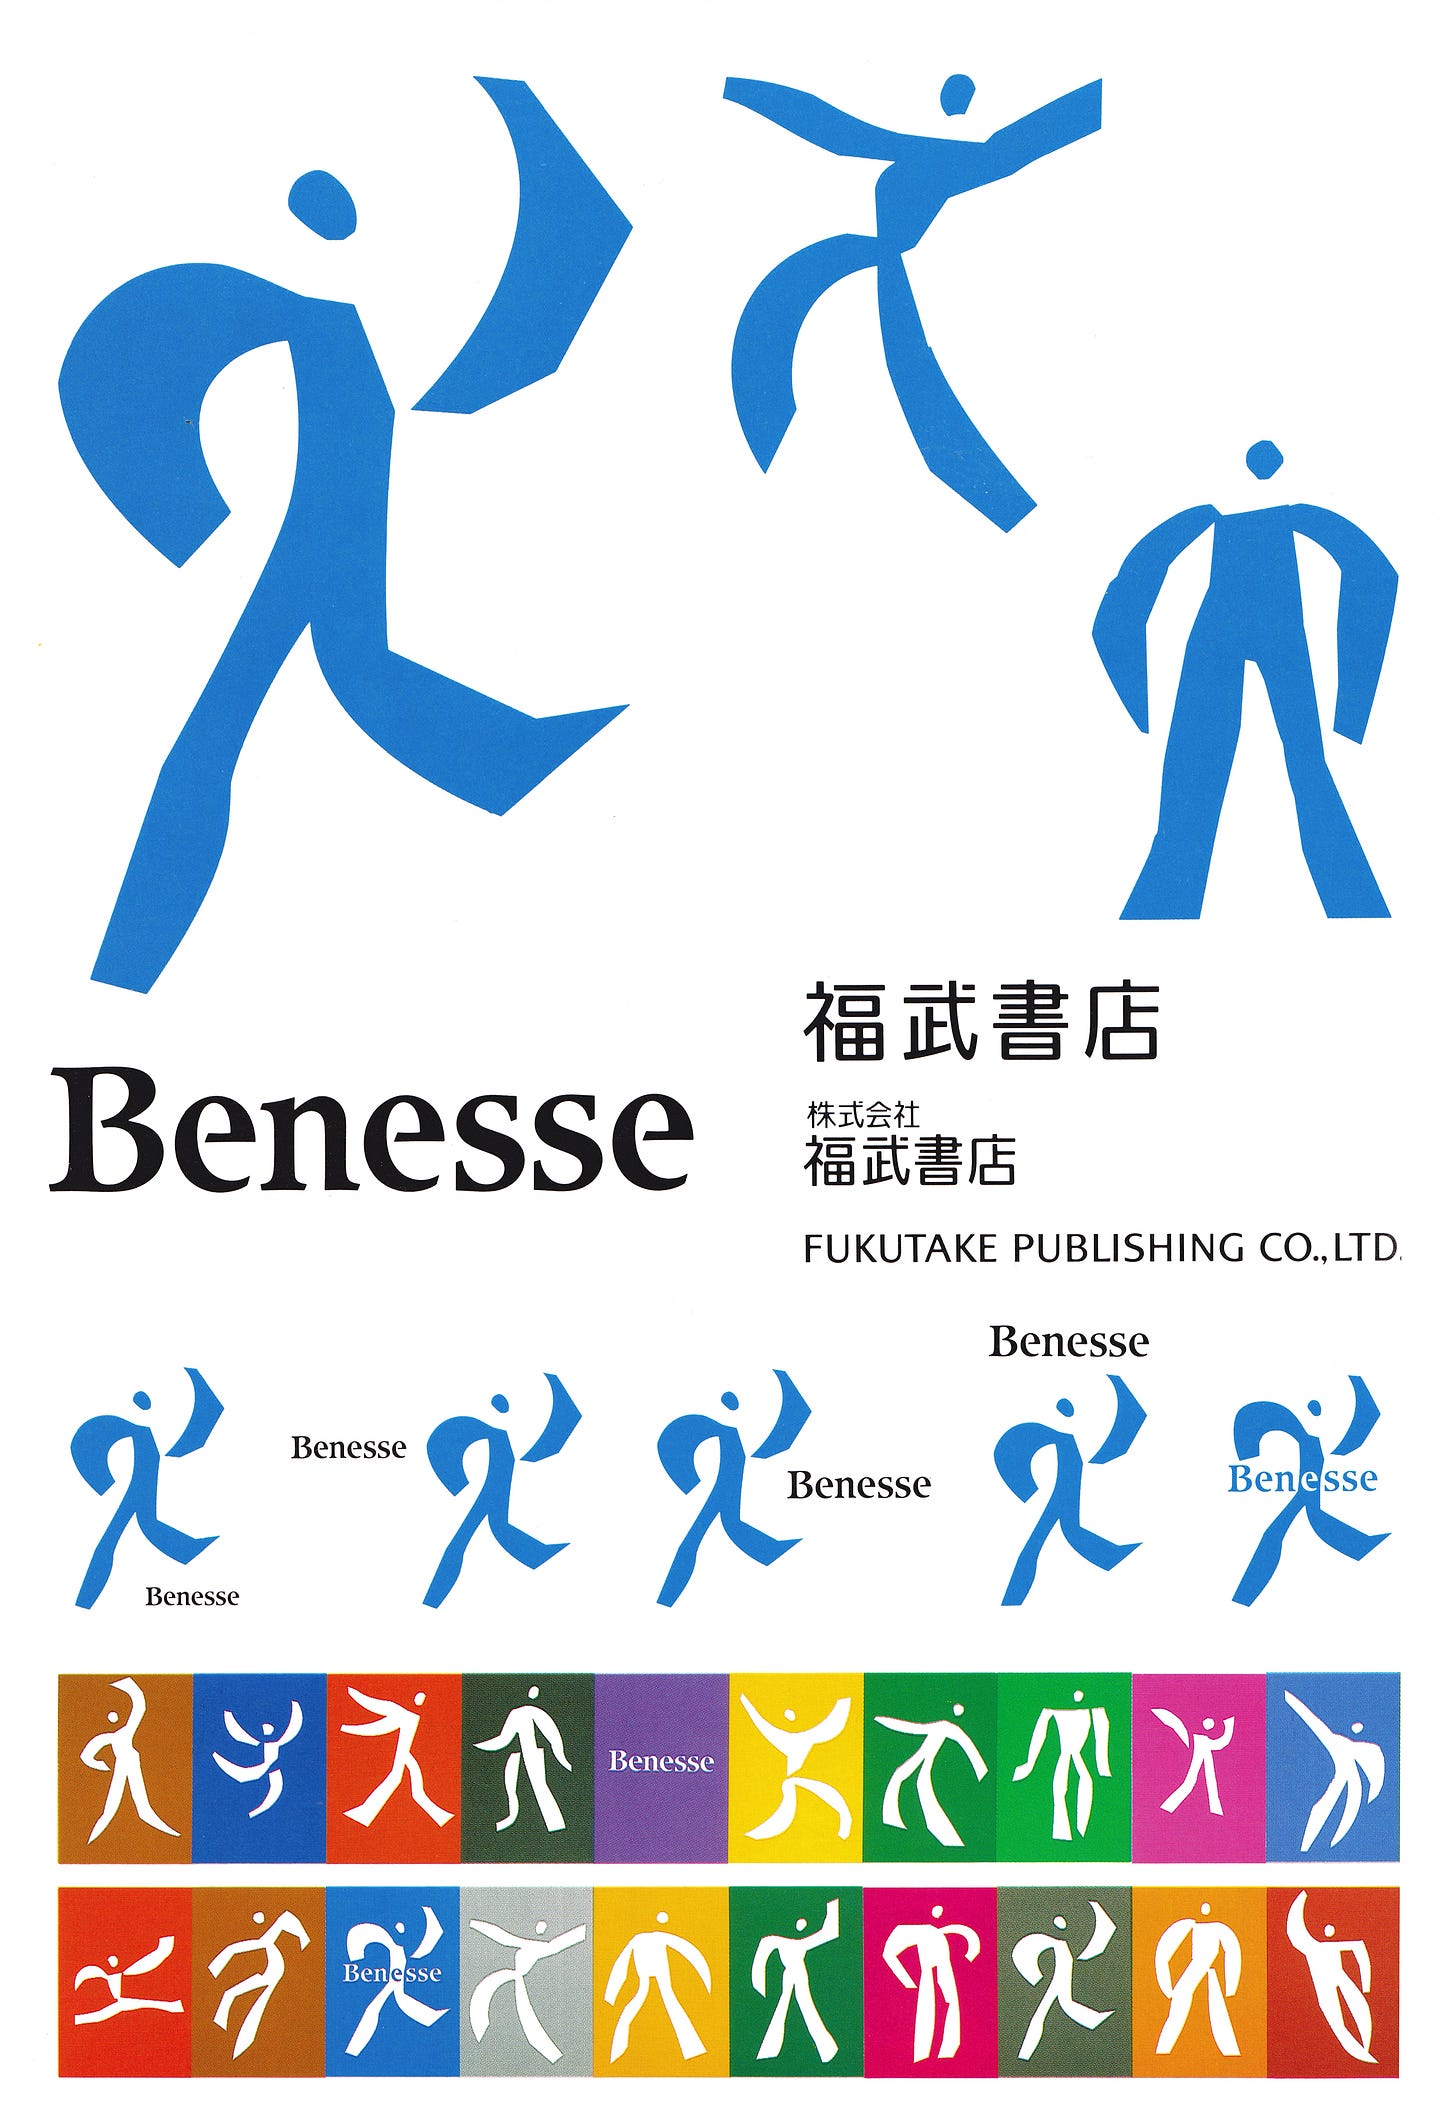 Benesse by PAOS1990, Japan